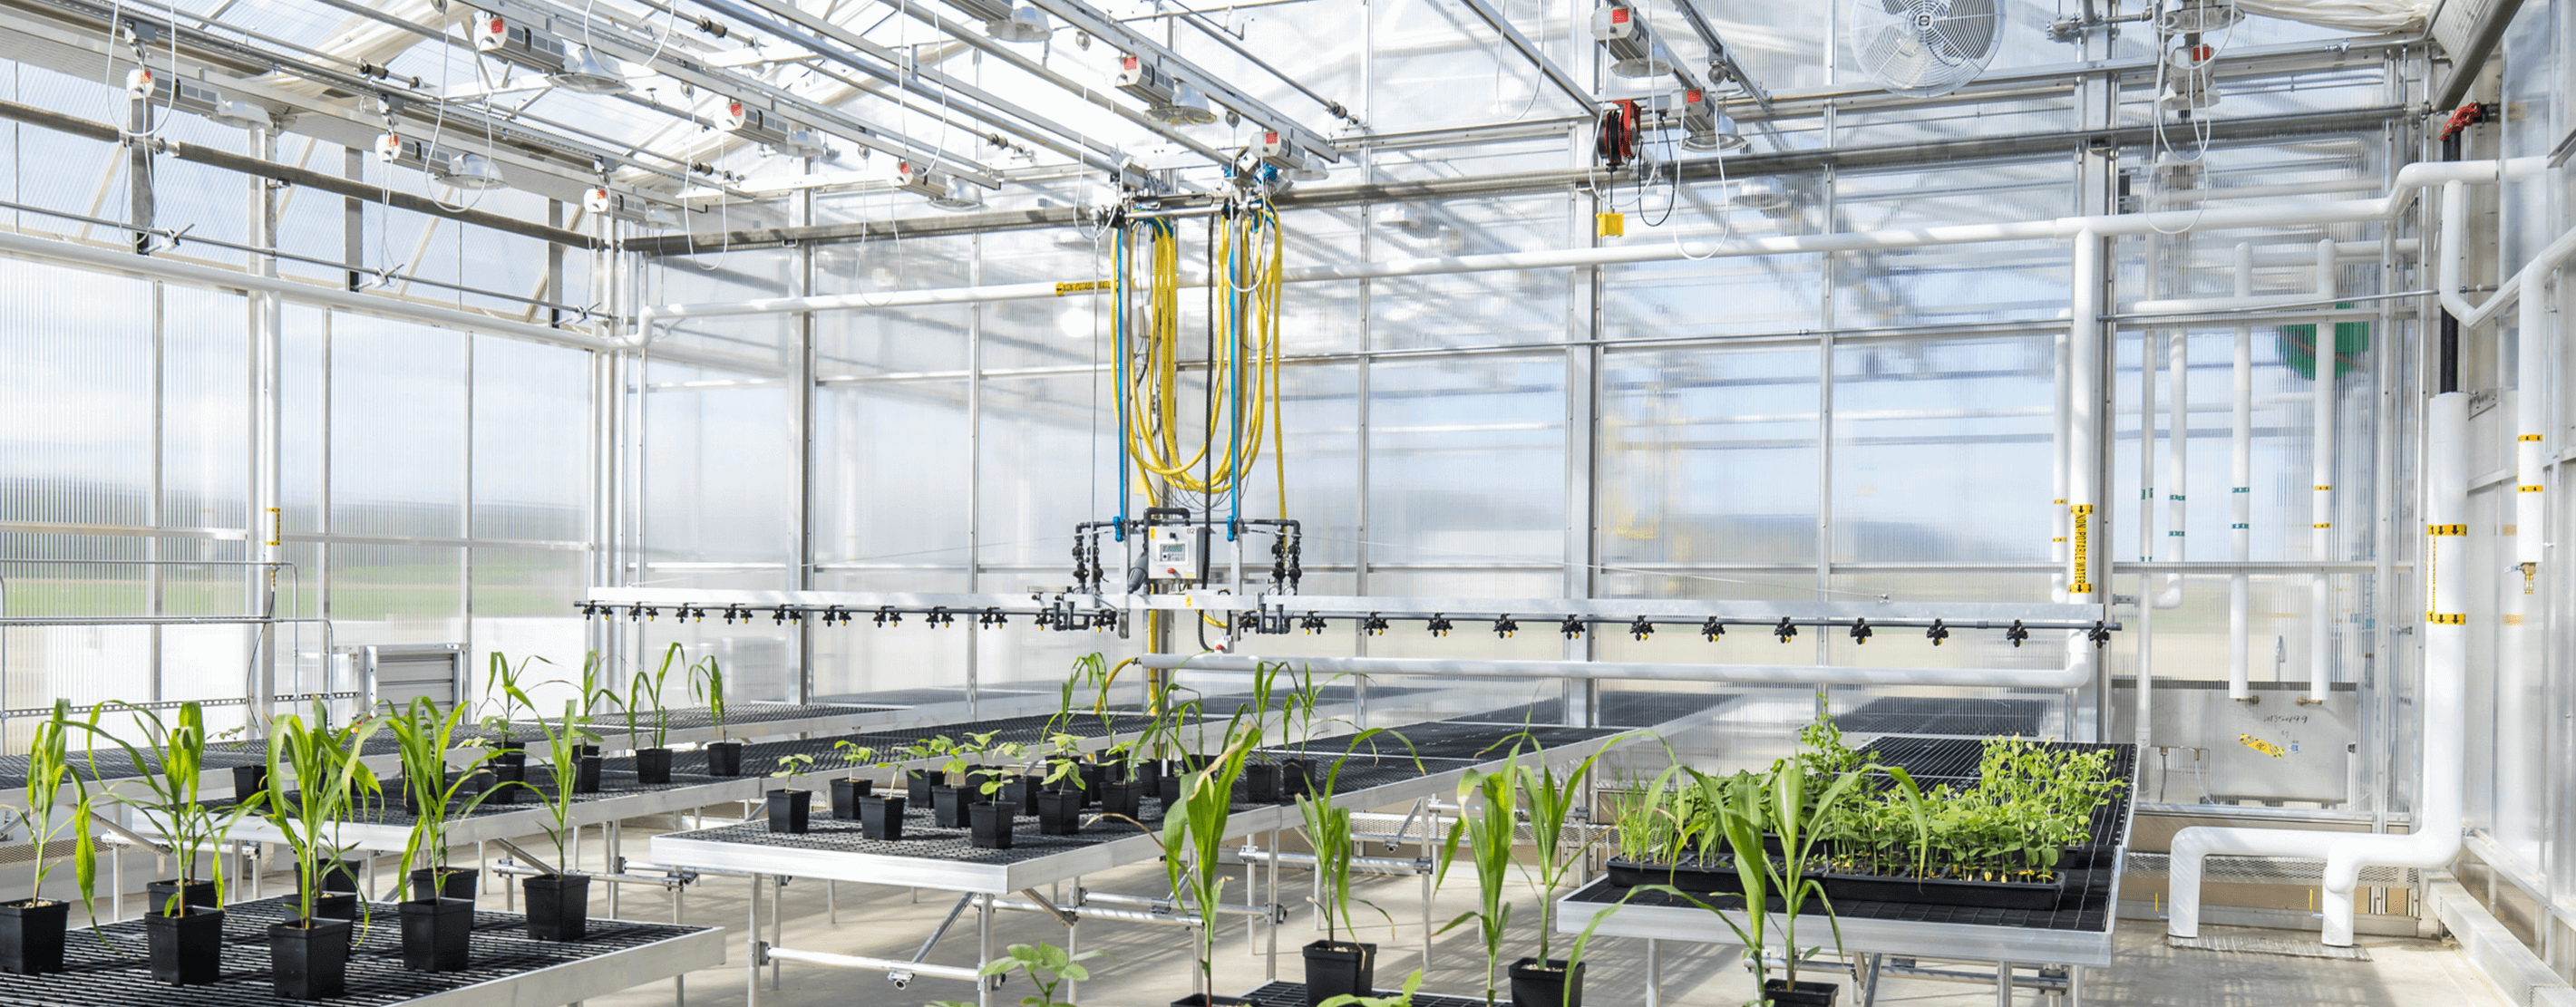 Inside A Land O'Lakes Research Facility Greenhouse